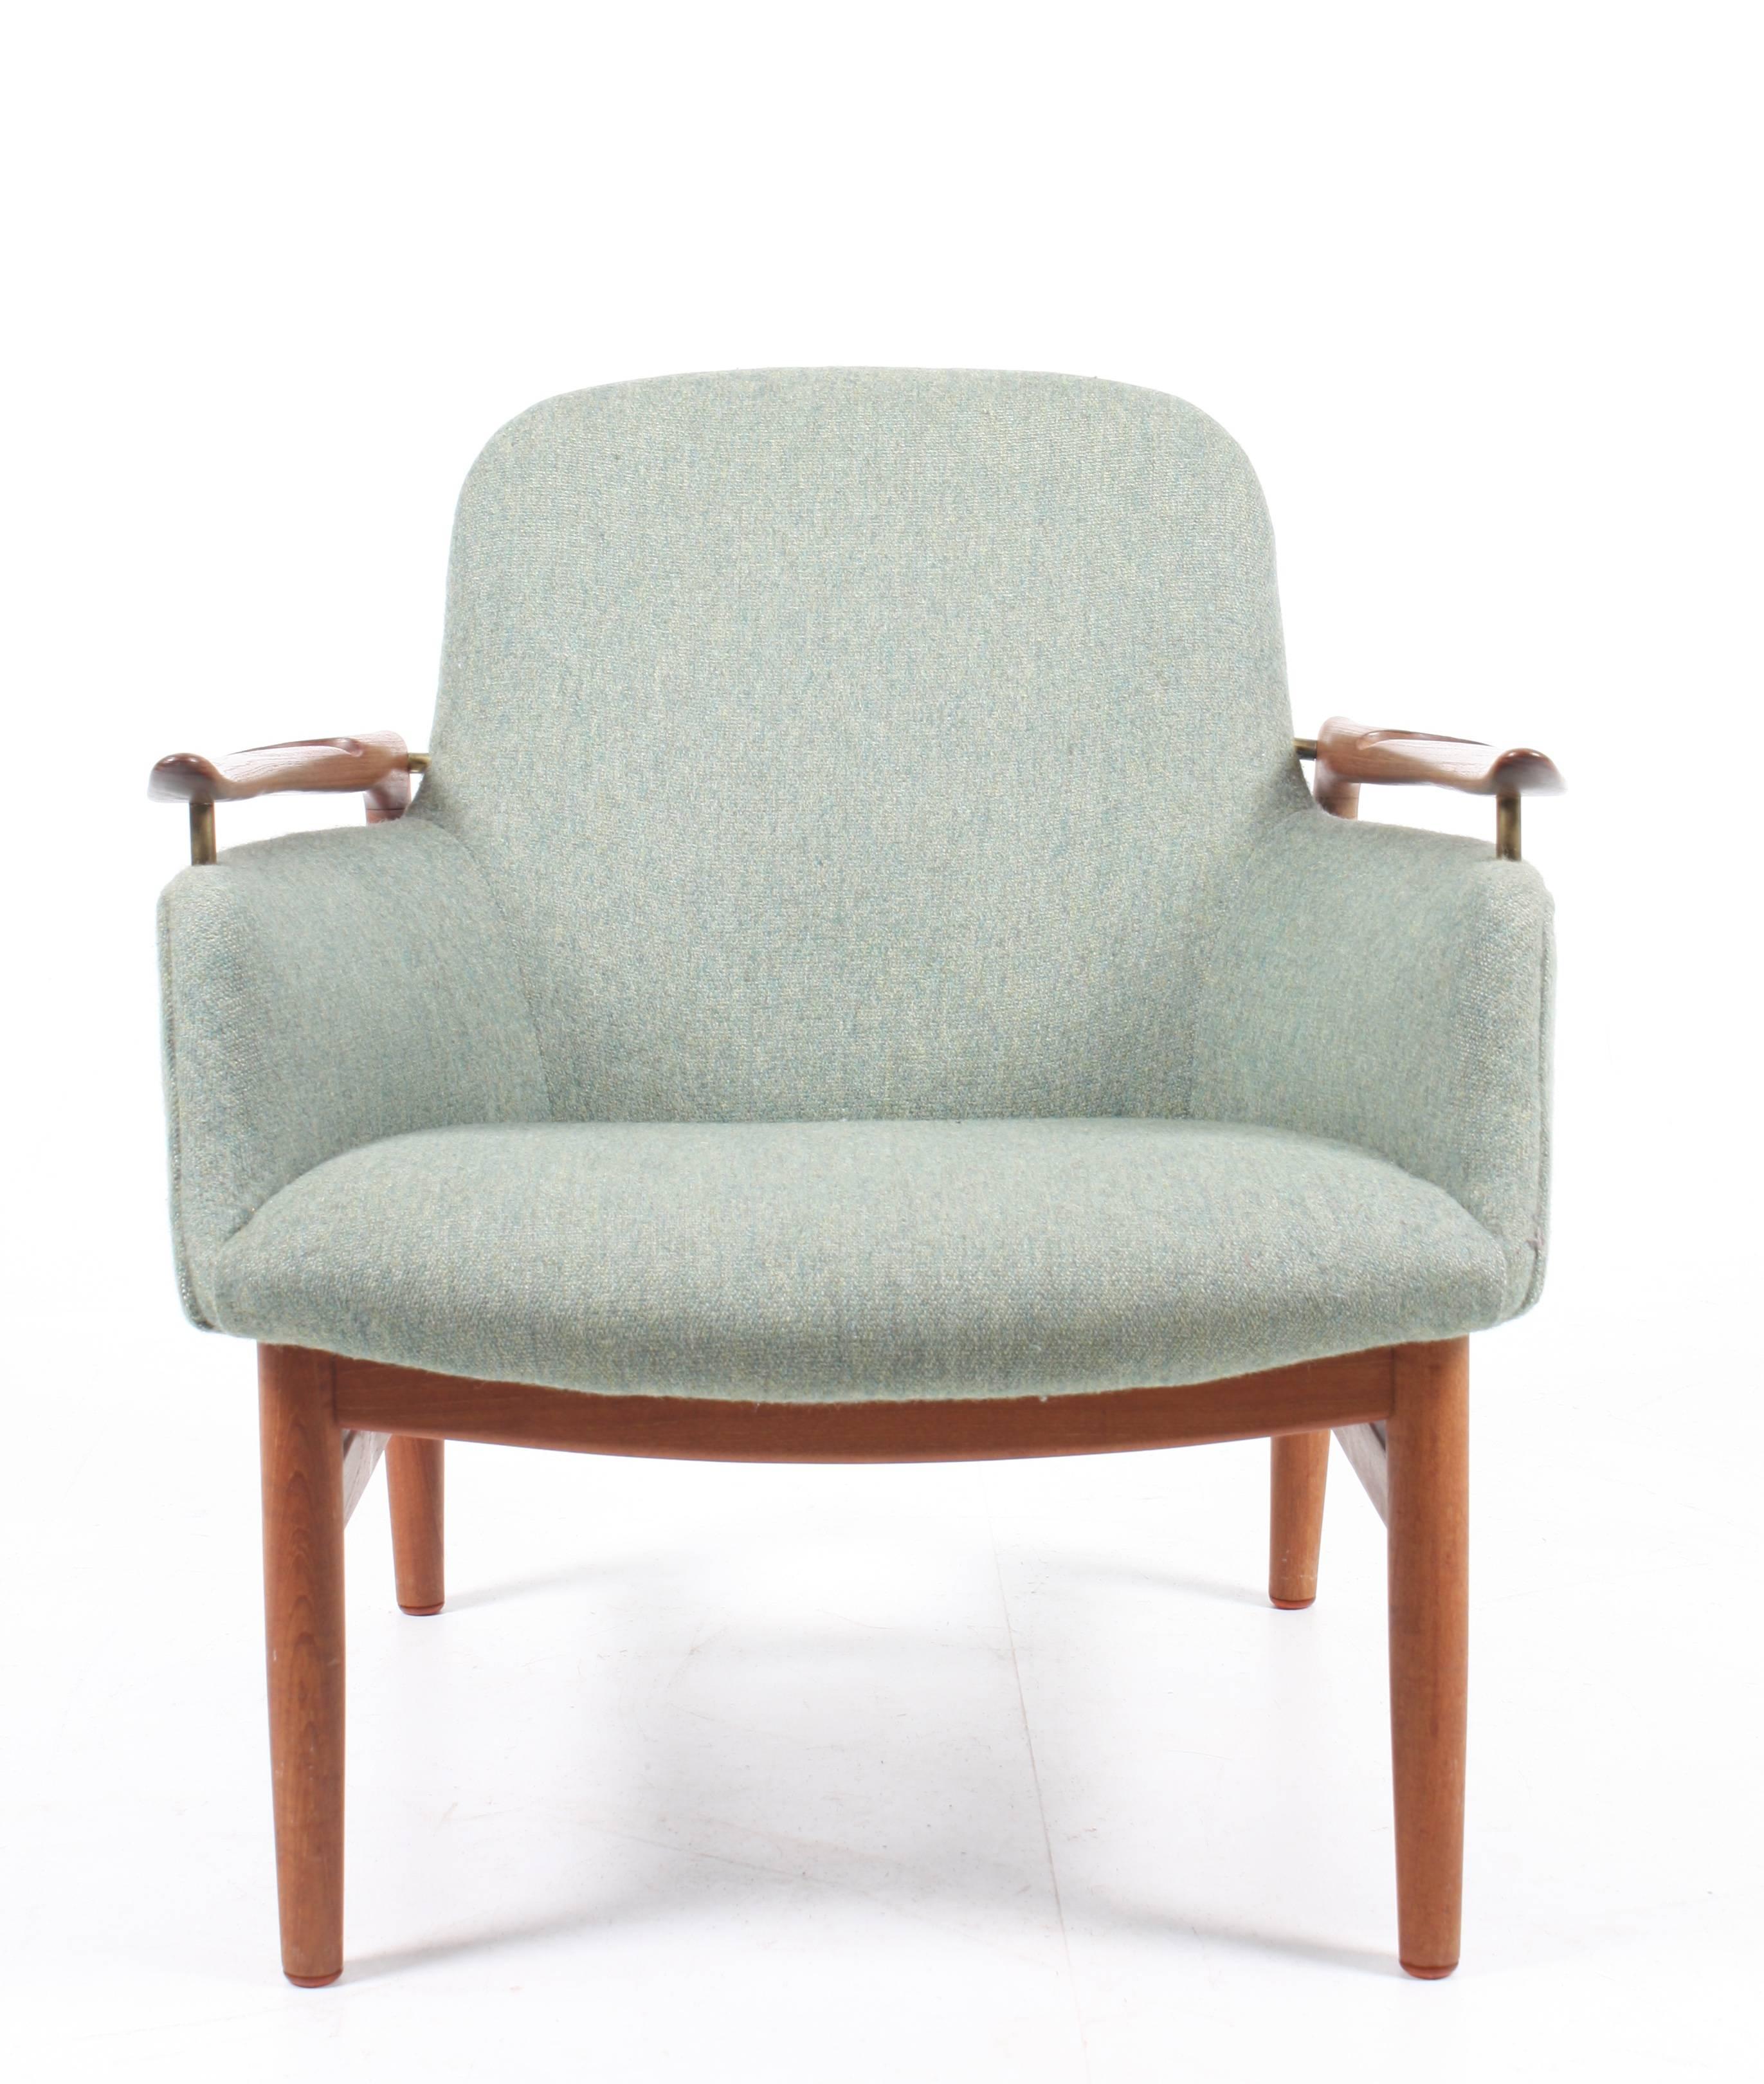 NV53 lounge chair in teak and fabric designed by Finn Juhl M.A.A. for Niels Vodder cabinetmakers in 1953. Made in Denmark, Great original condition.